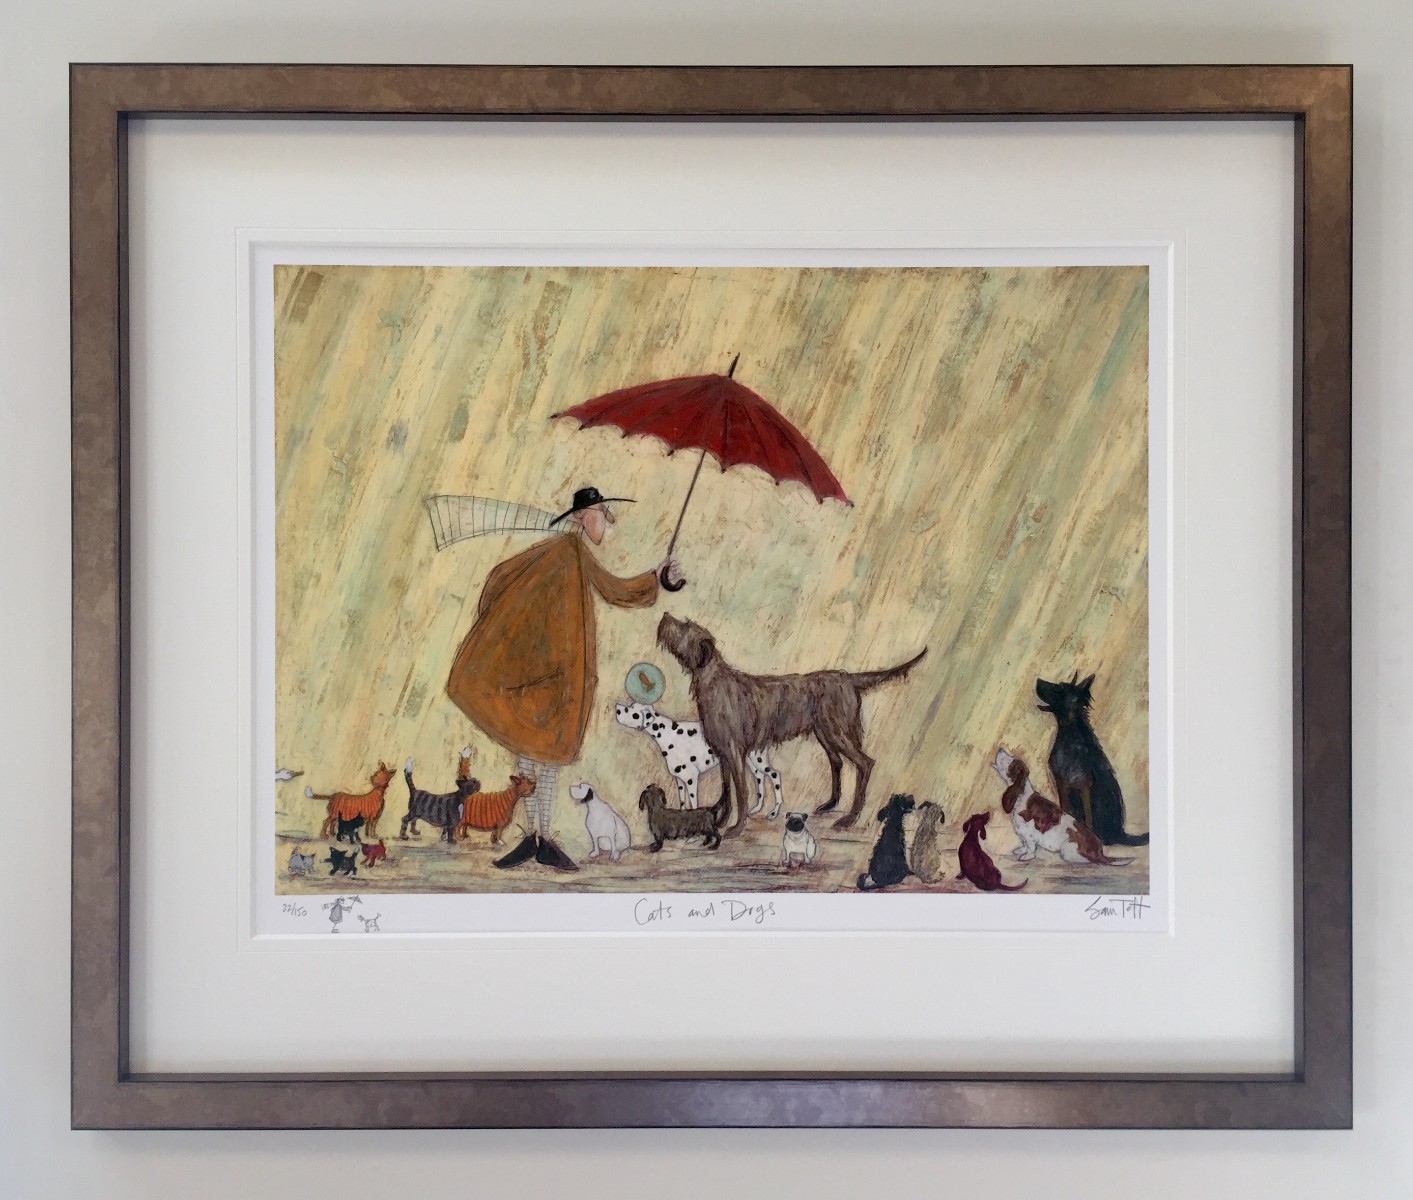 Cats and Dogs (Remarque) by Sam Toft